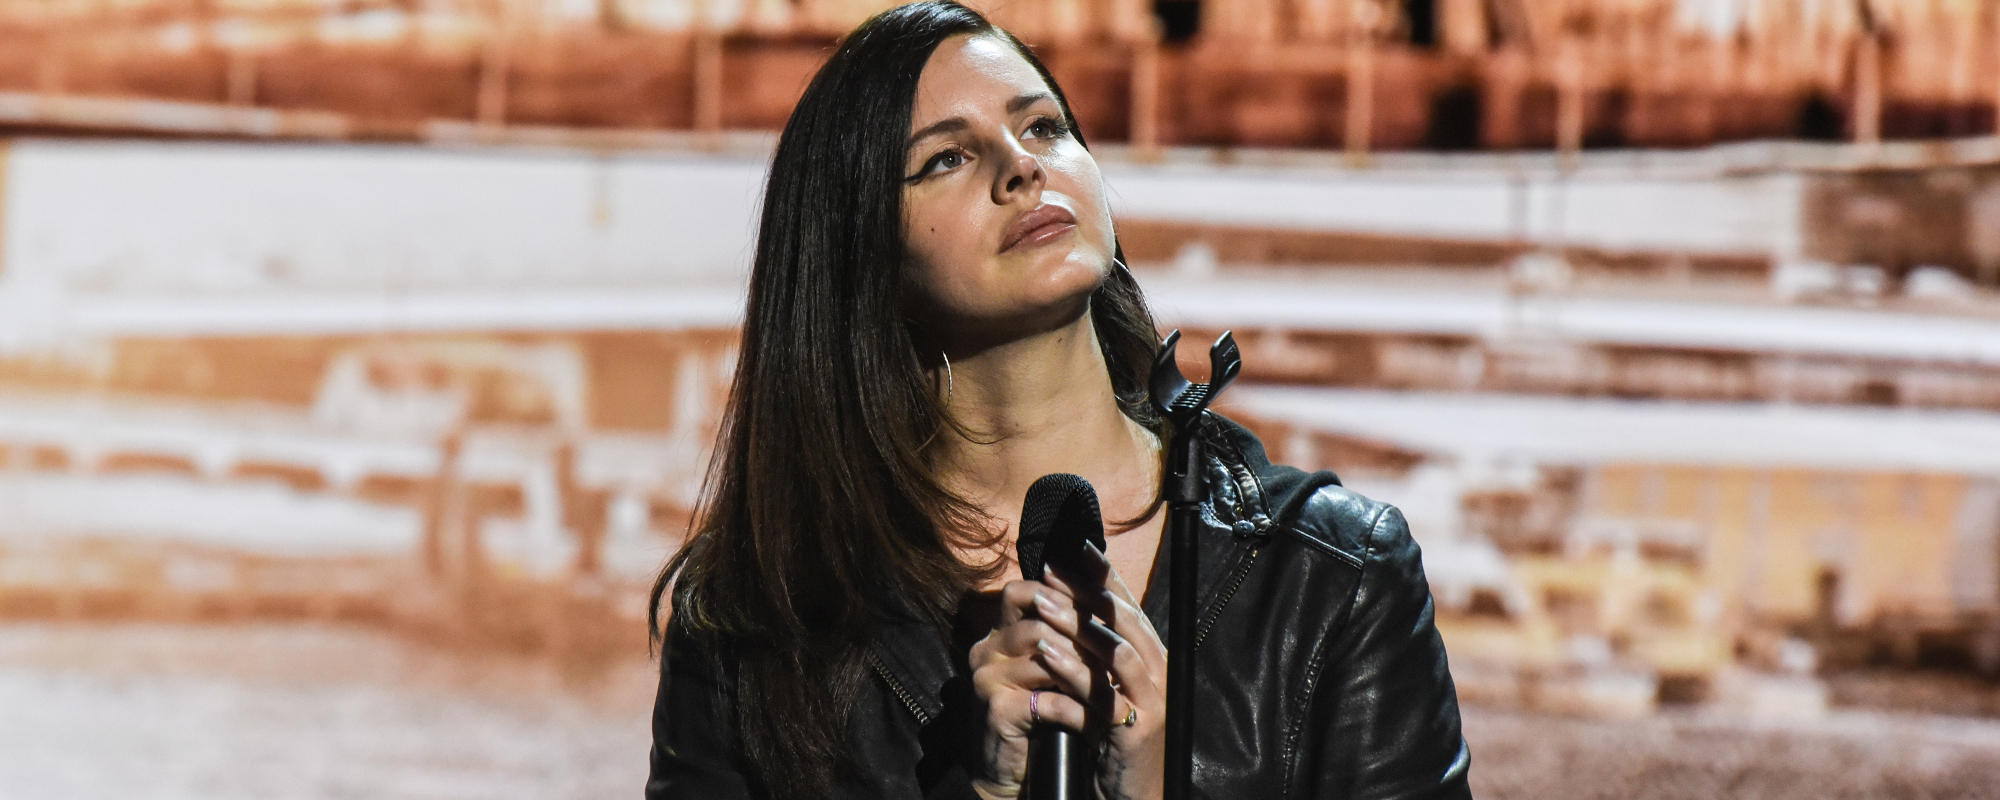 Lana Del Rey Cues Up Eighth Album, ‘Blue Banisters’